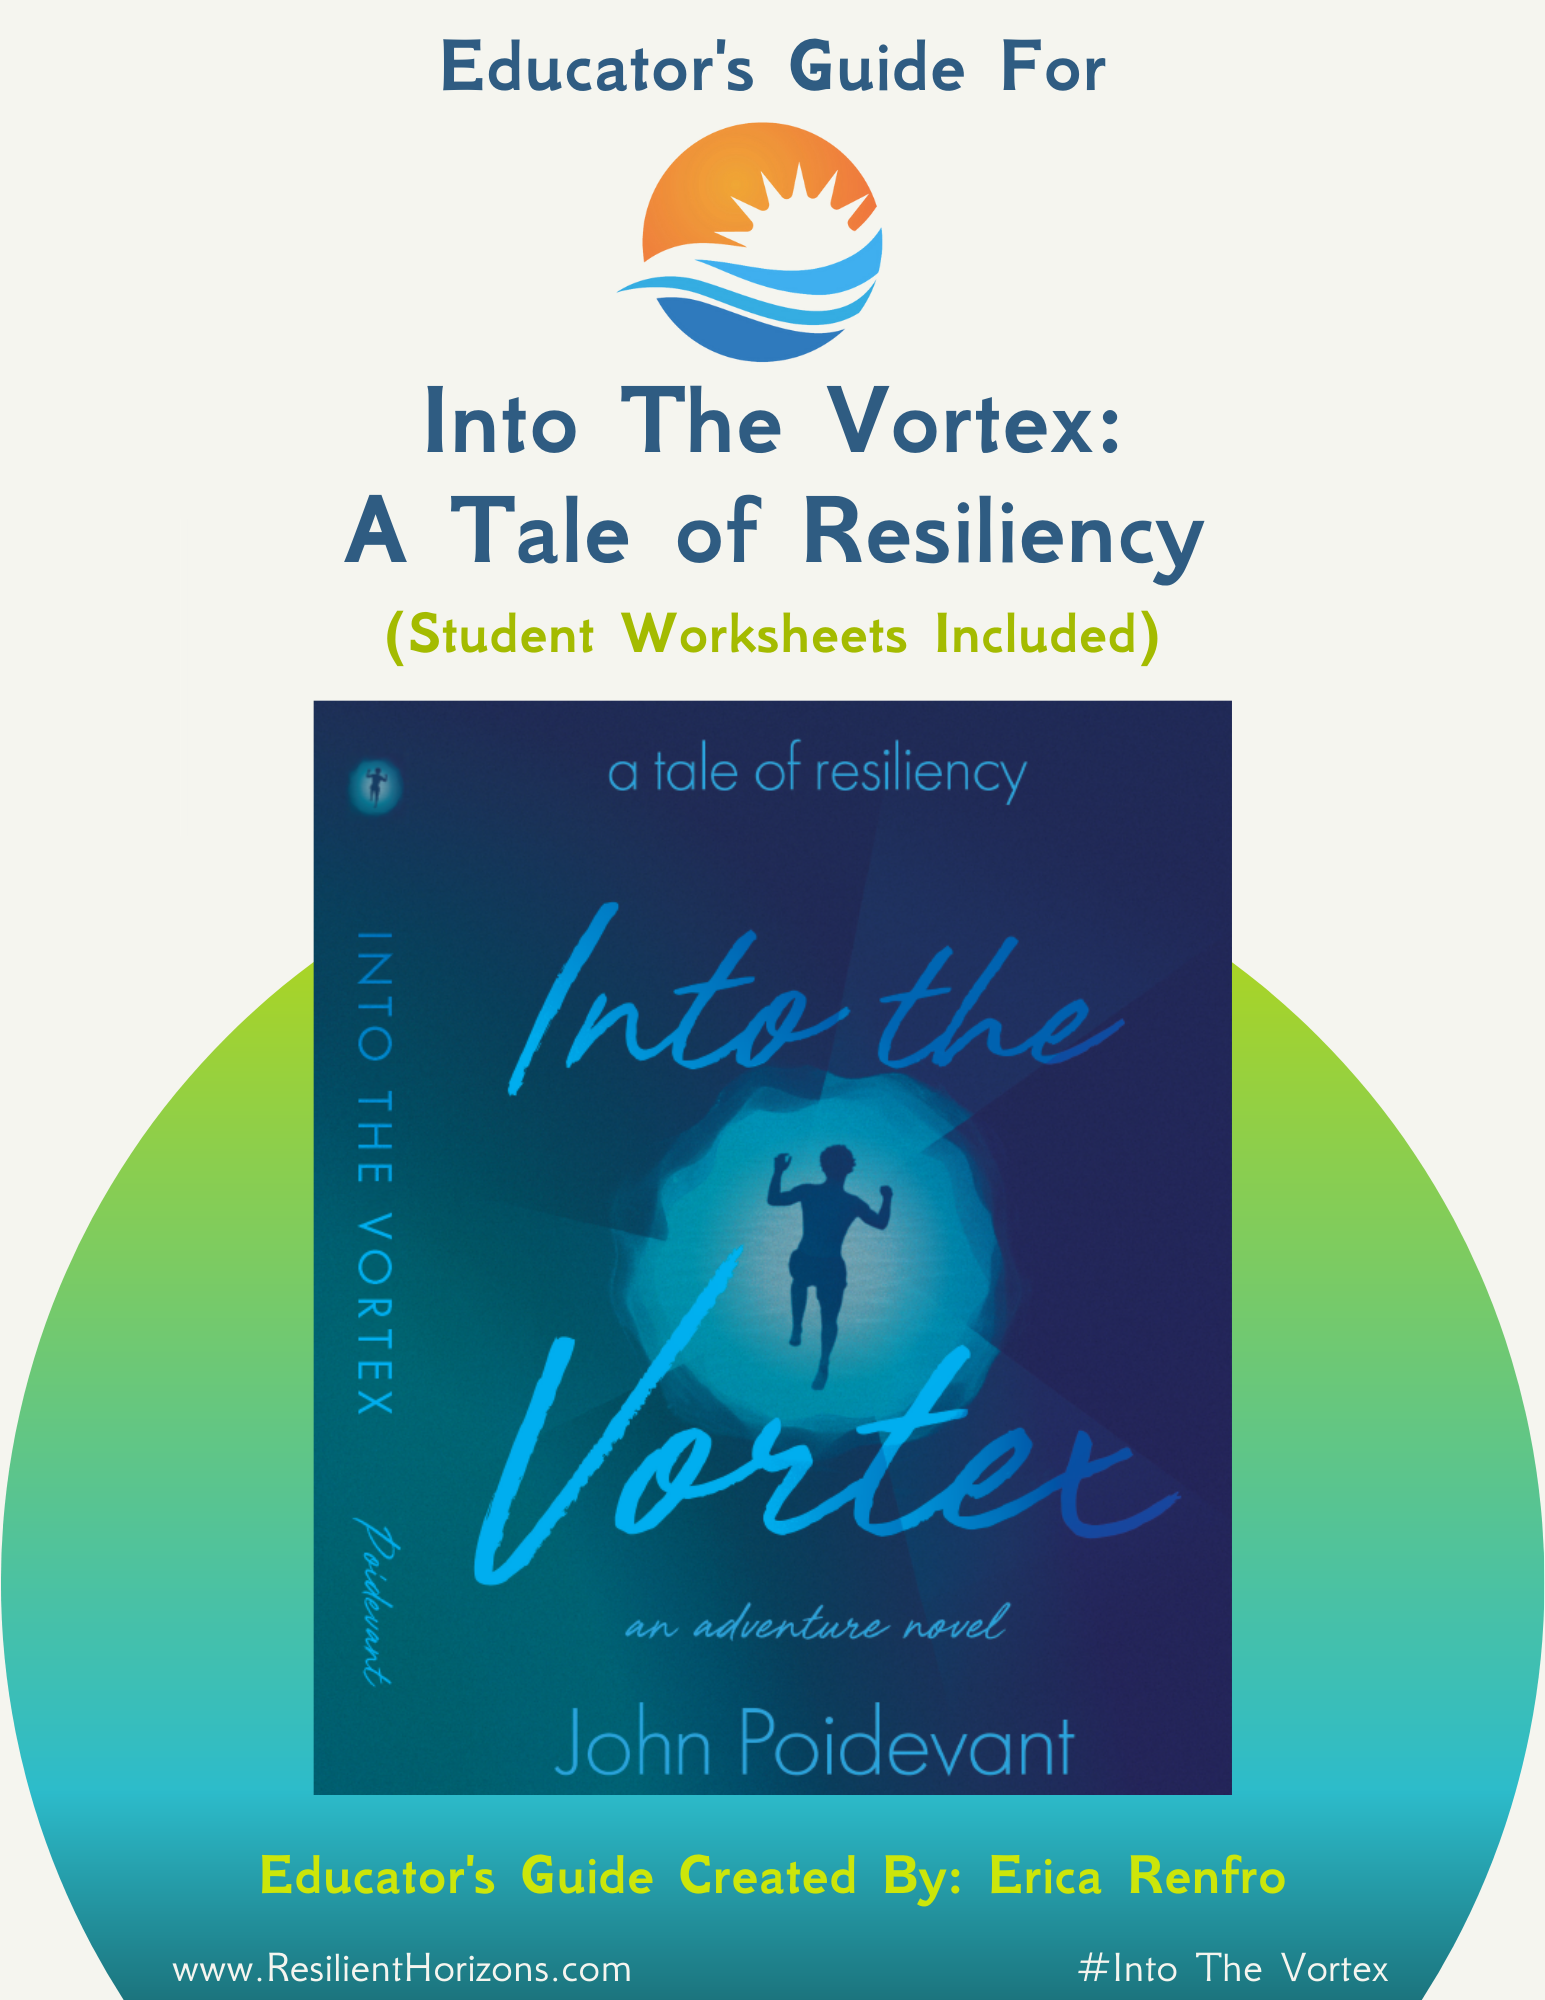 Into the Vortex: A Tale of Resiliency